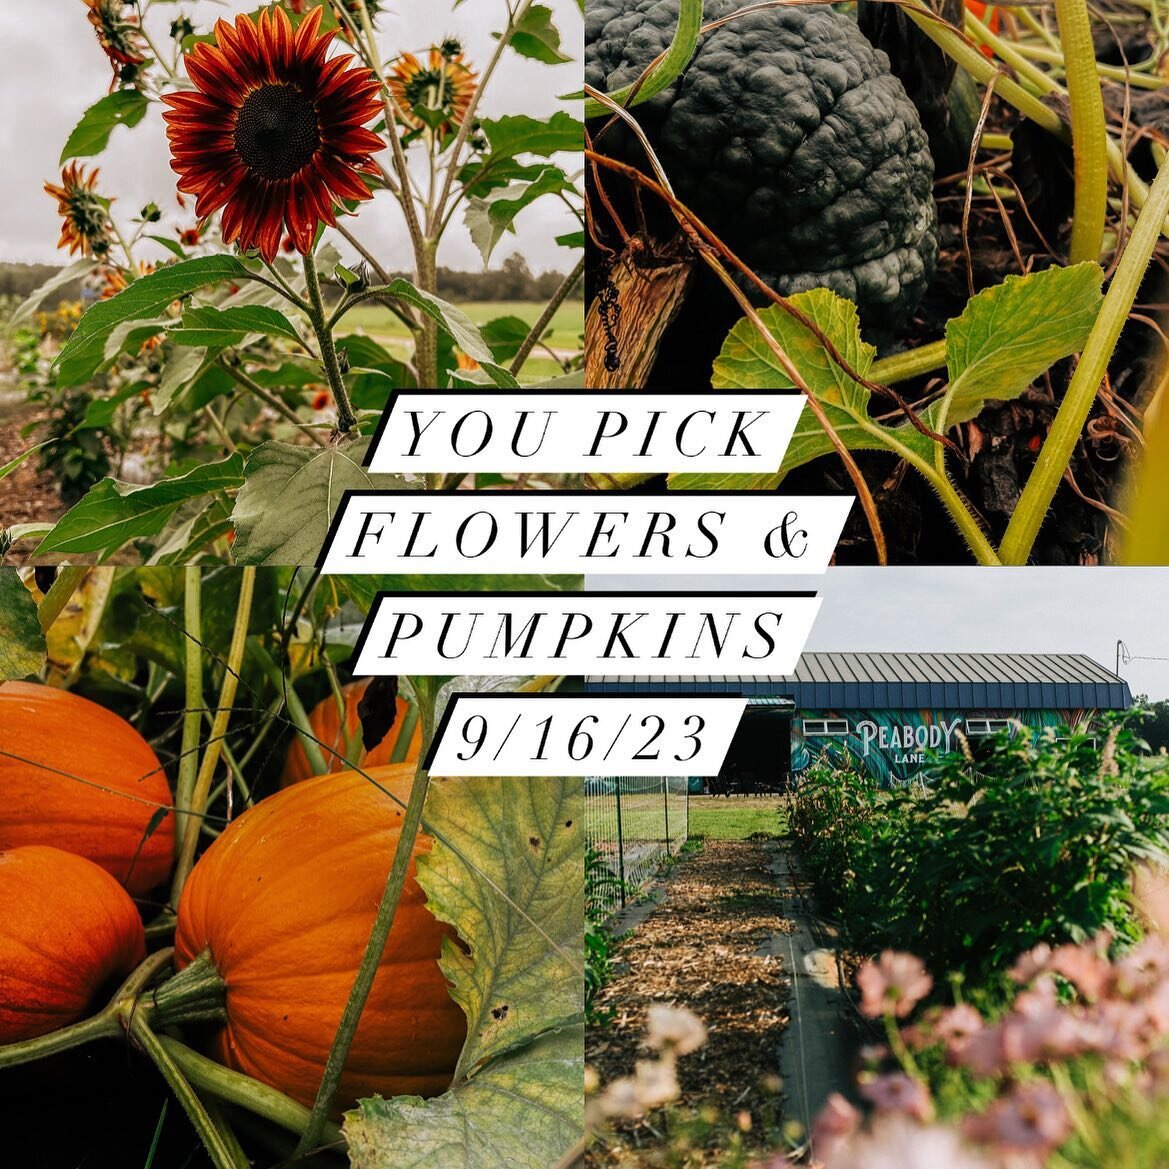 In just one week we&rsquo;ll have our first You Pick day!! Flowers, pumpkins, and a photo op! Bring your family and get some cute fall beauties and make some great fall memories! See you next Saturday, September 16. 10a-6p. 🍁🌻